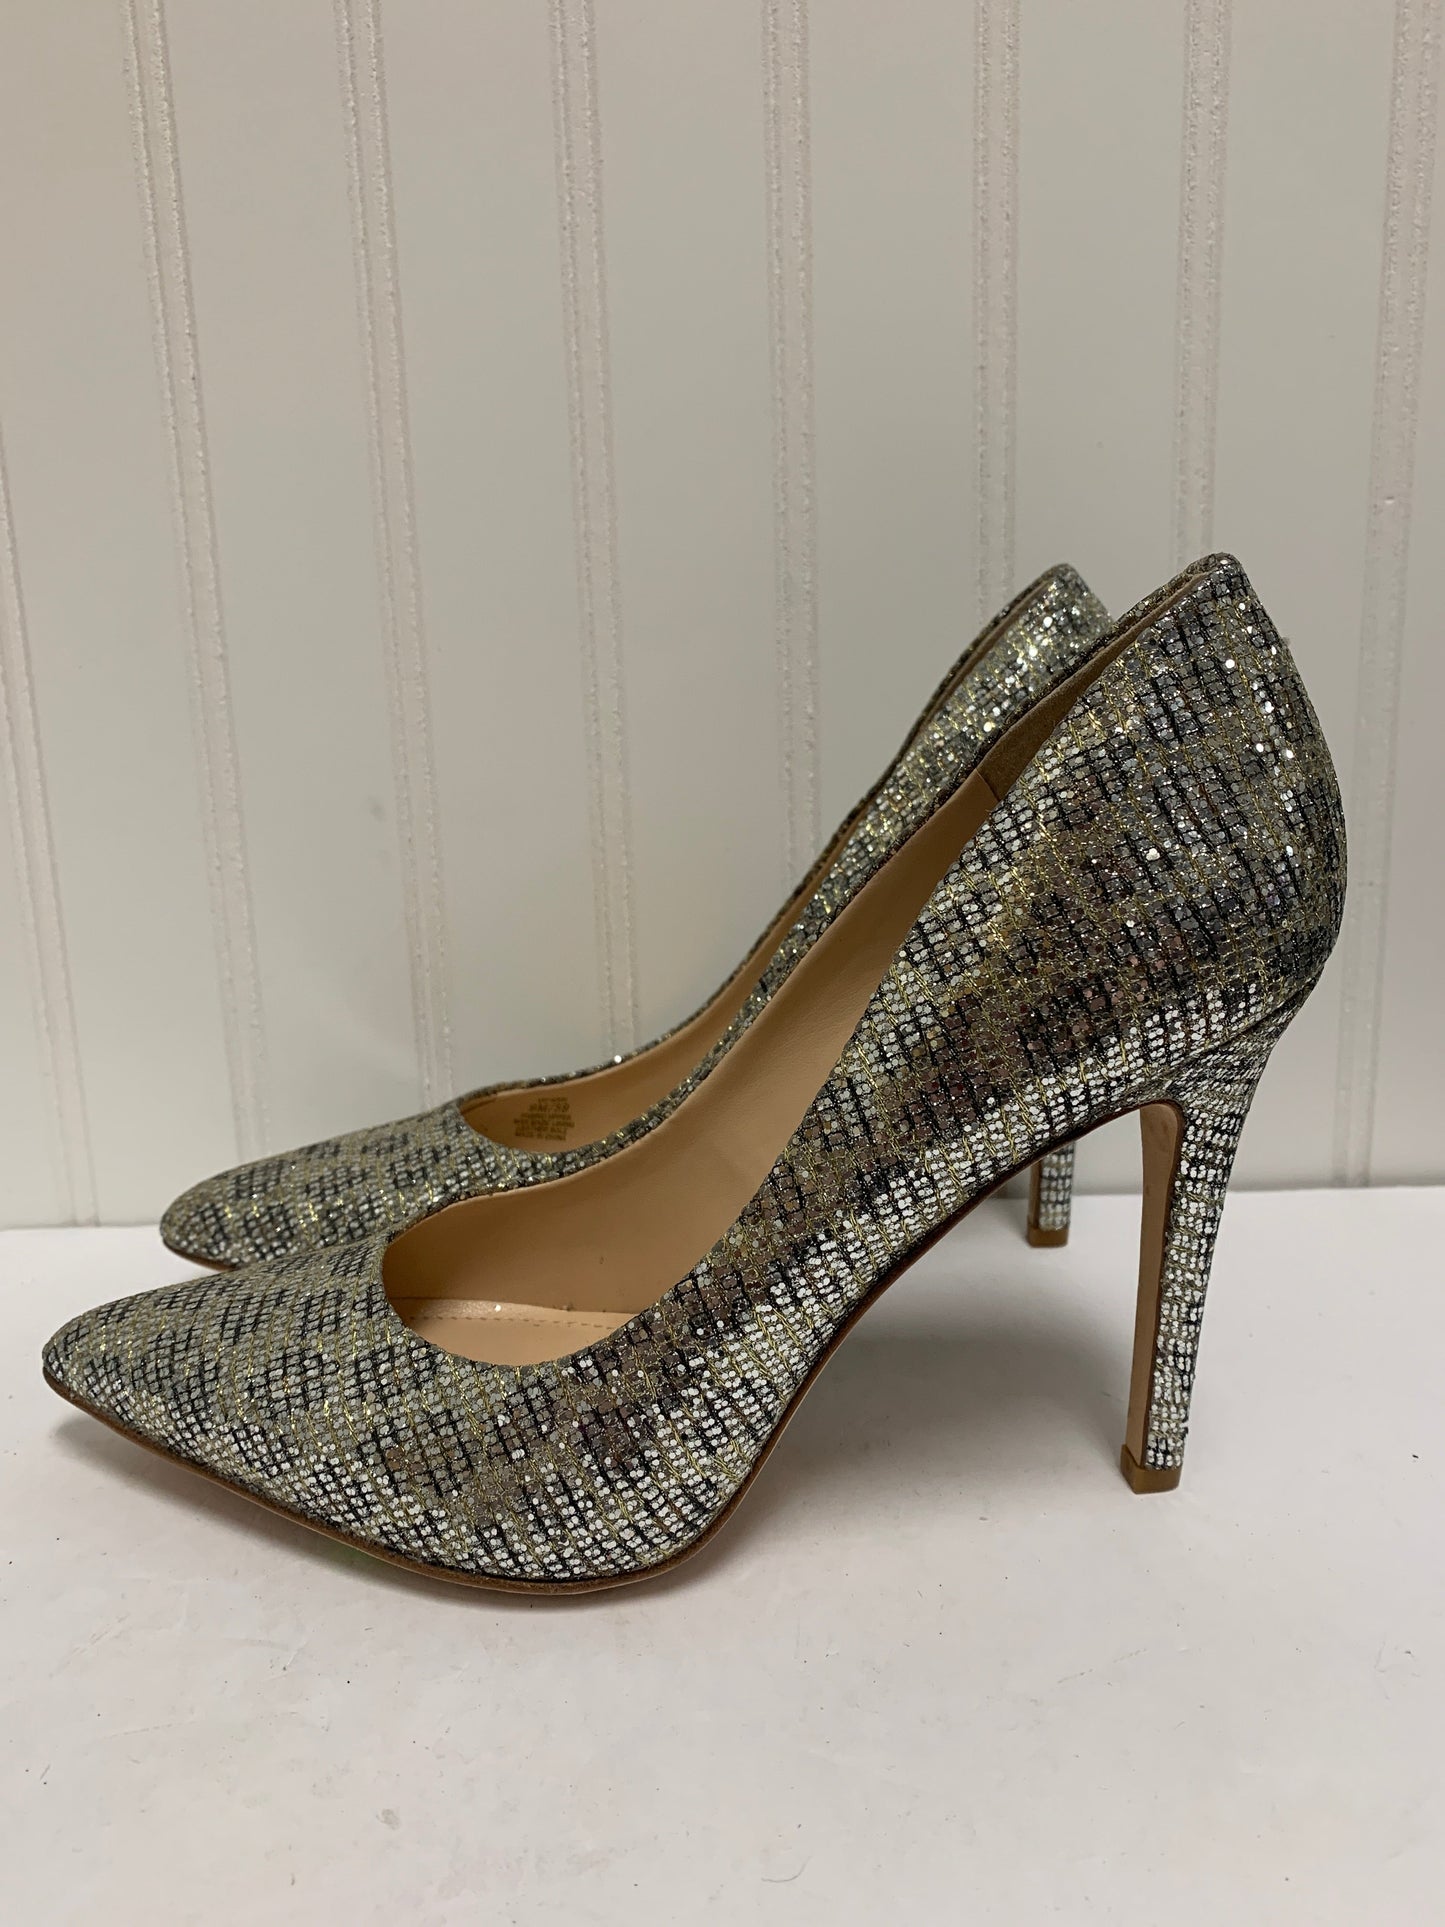 Shoes Heels Stiletto By Vince Camuto  Size: 9